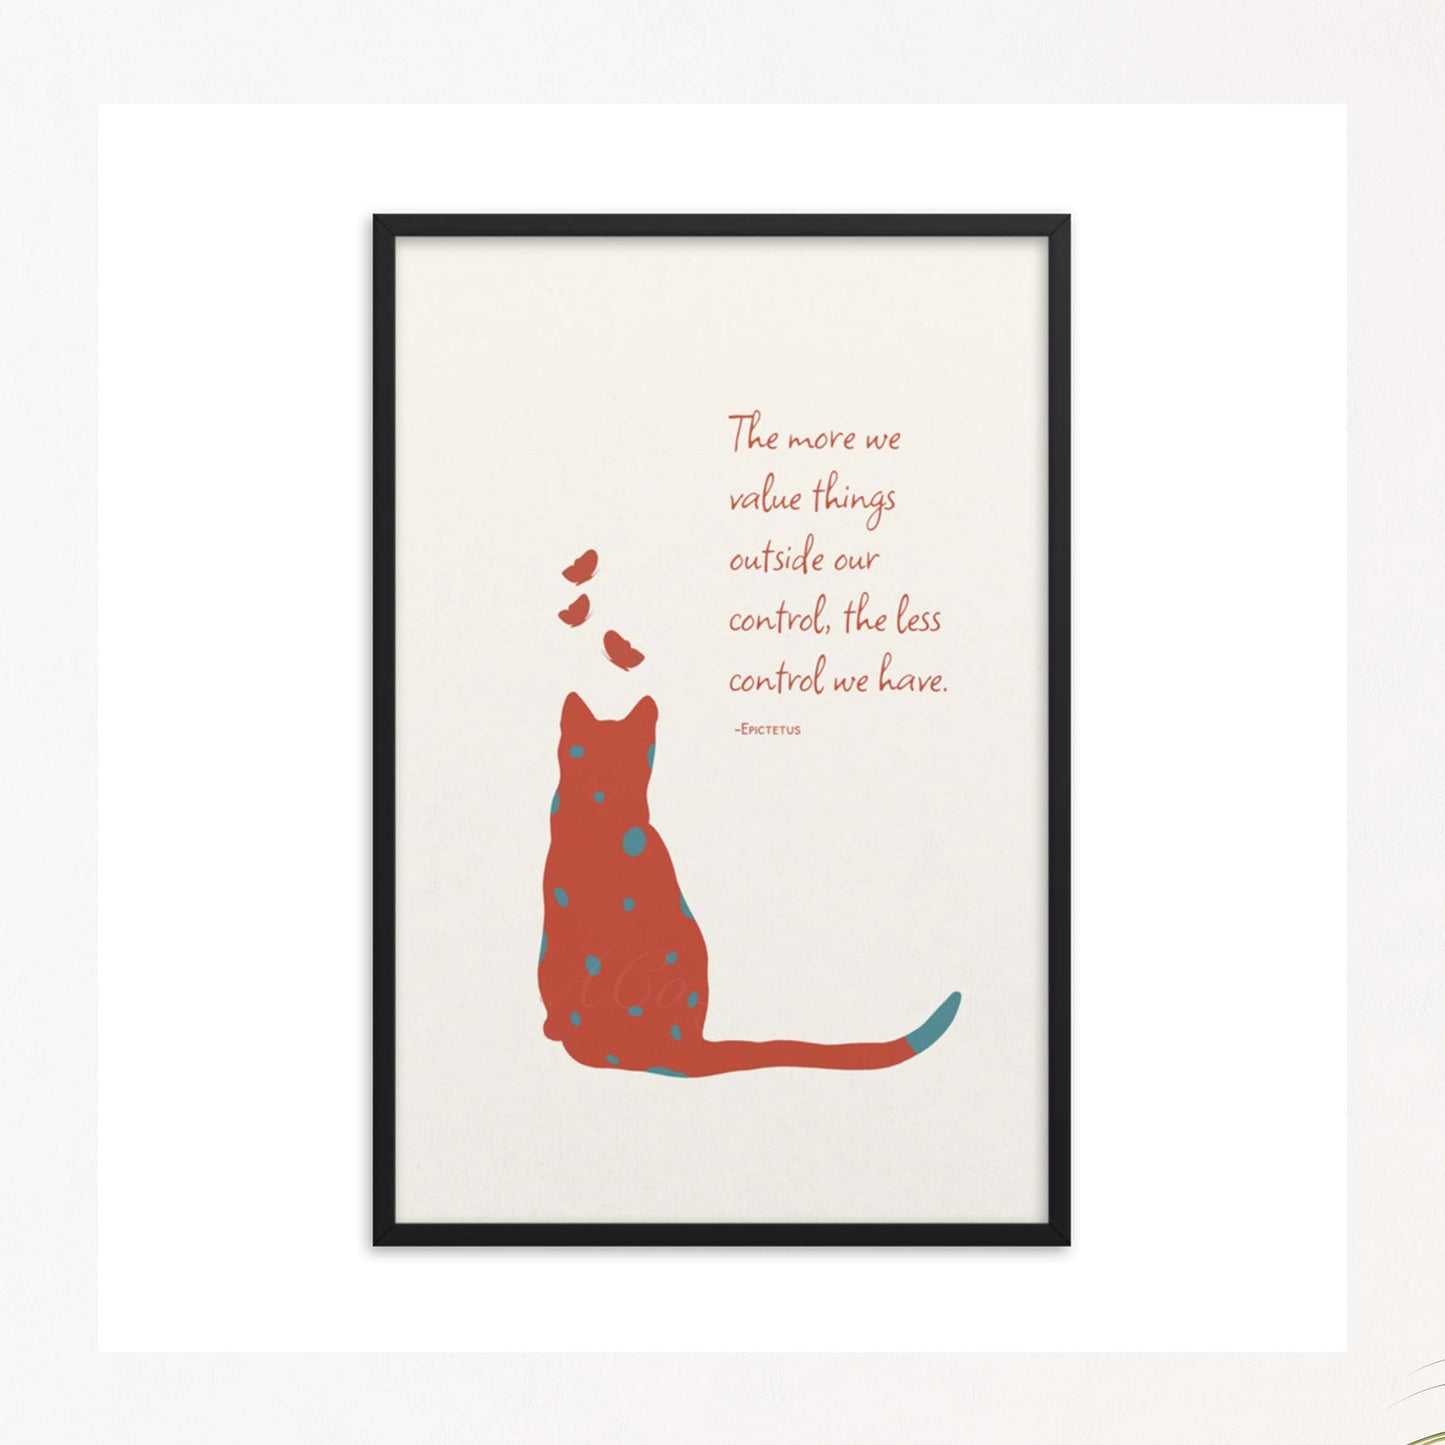 Epictetus Stoic Quote Poster, Epictetus Stoic Quote Poster, with a cat & butterflies illustration in red & blue on white background in black frame.